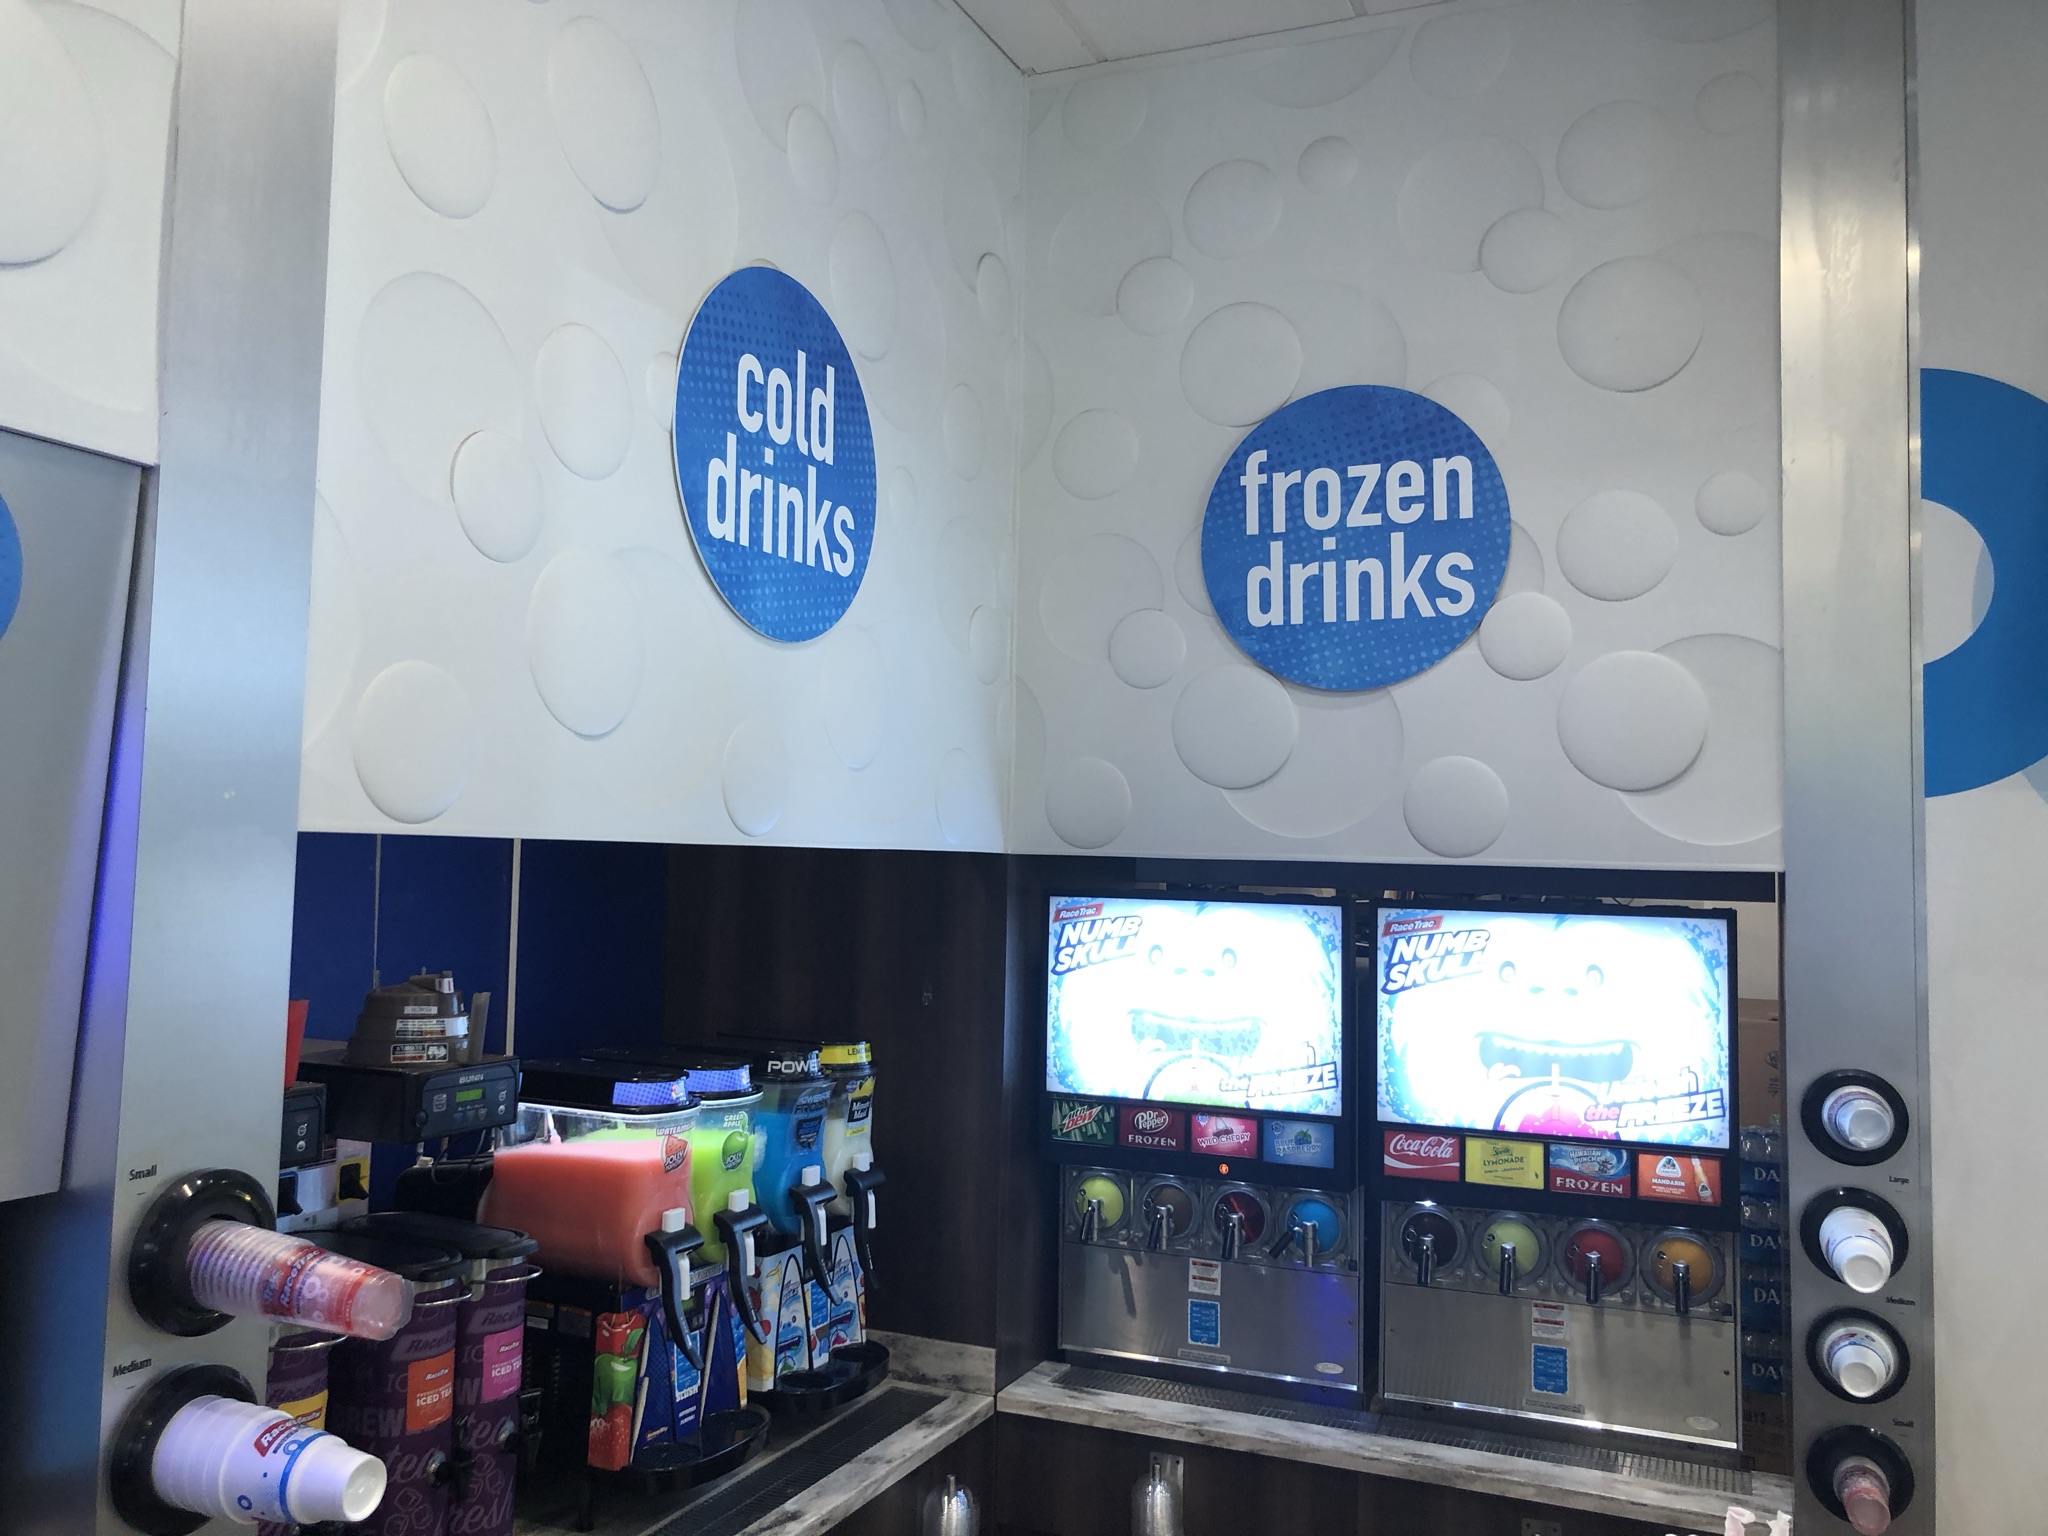 Available property at RaceTrac Frozen Drink Station